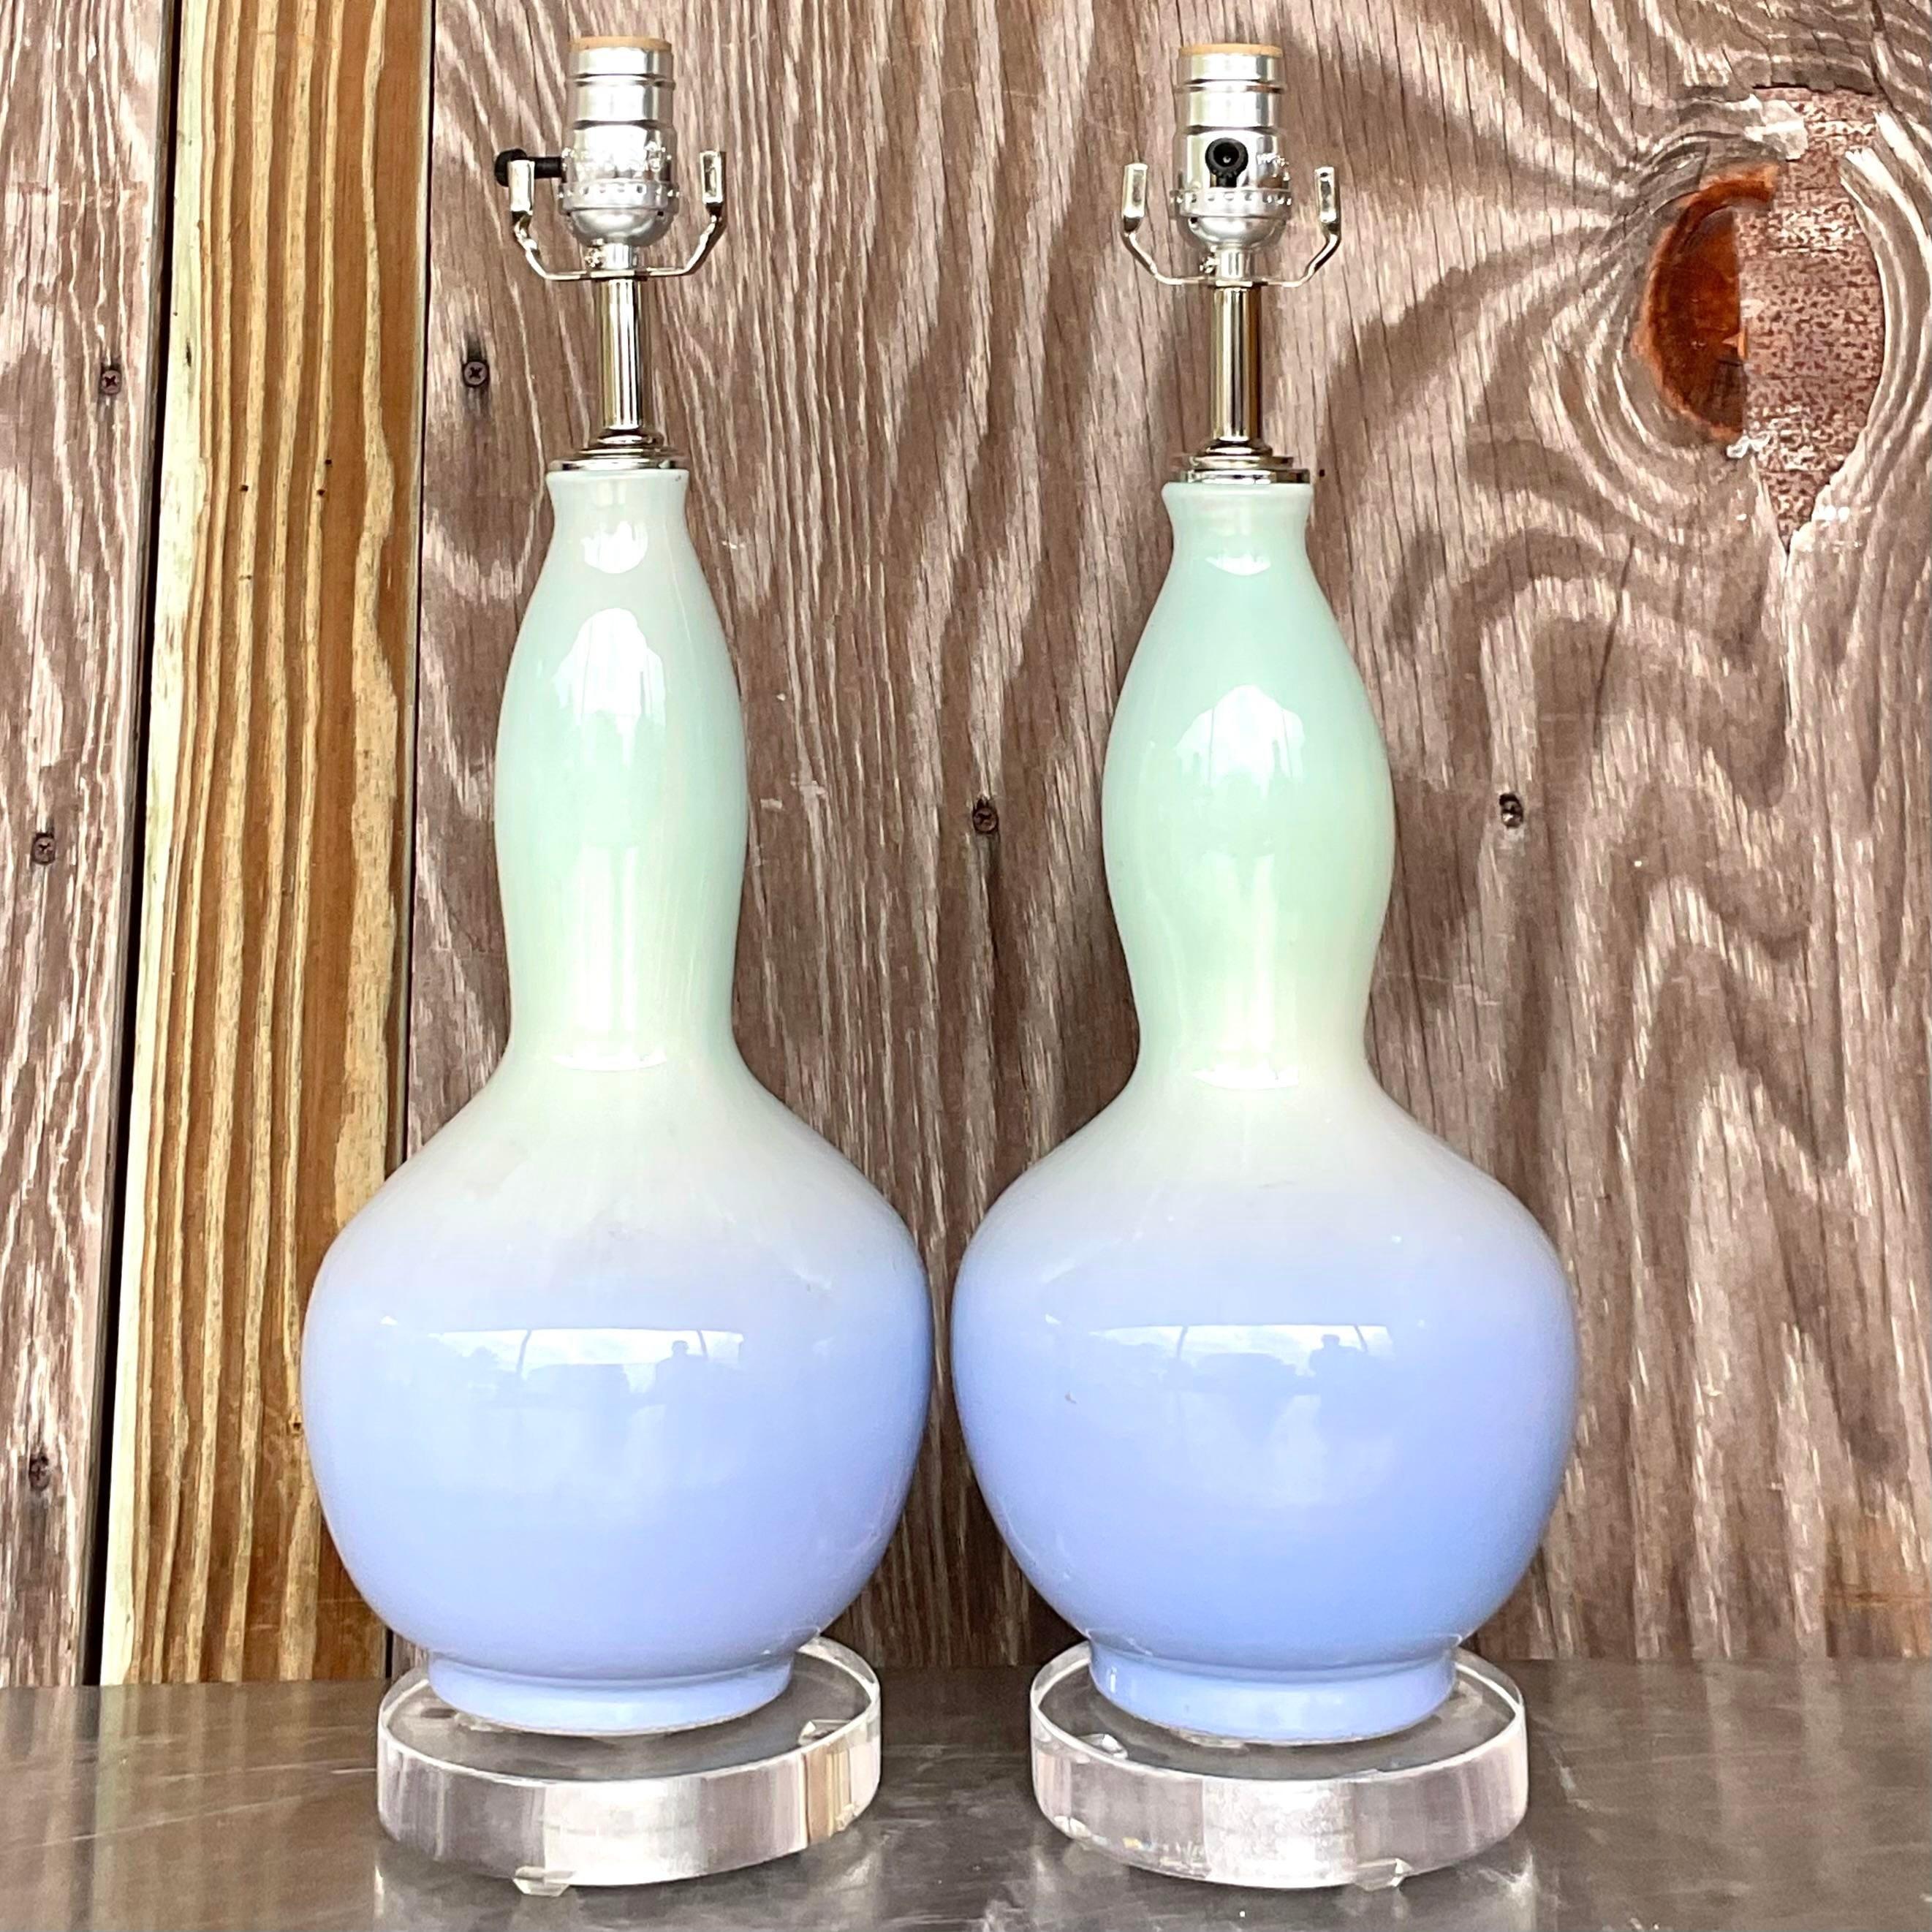 American Vintage Regency Ombre Glass Lamps - a Pair For Sale